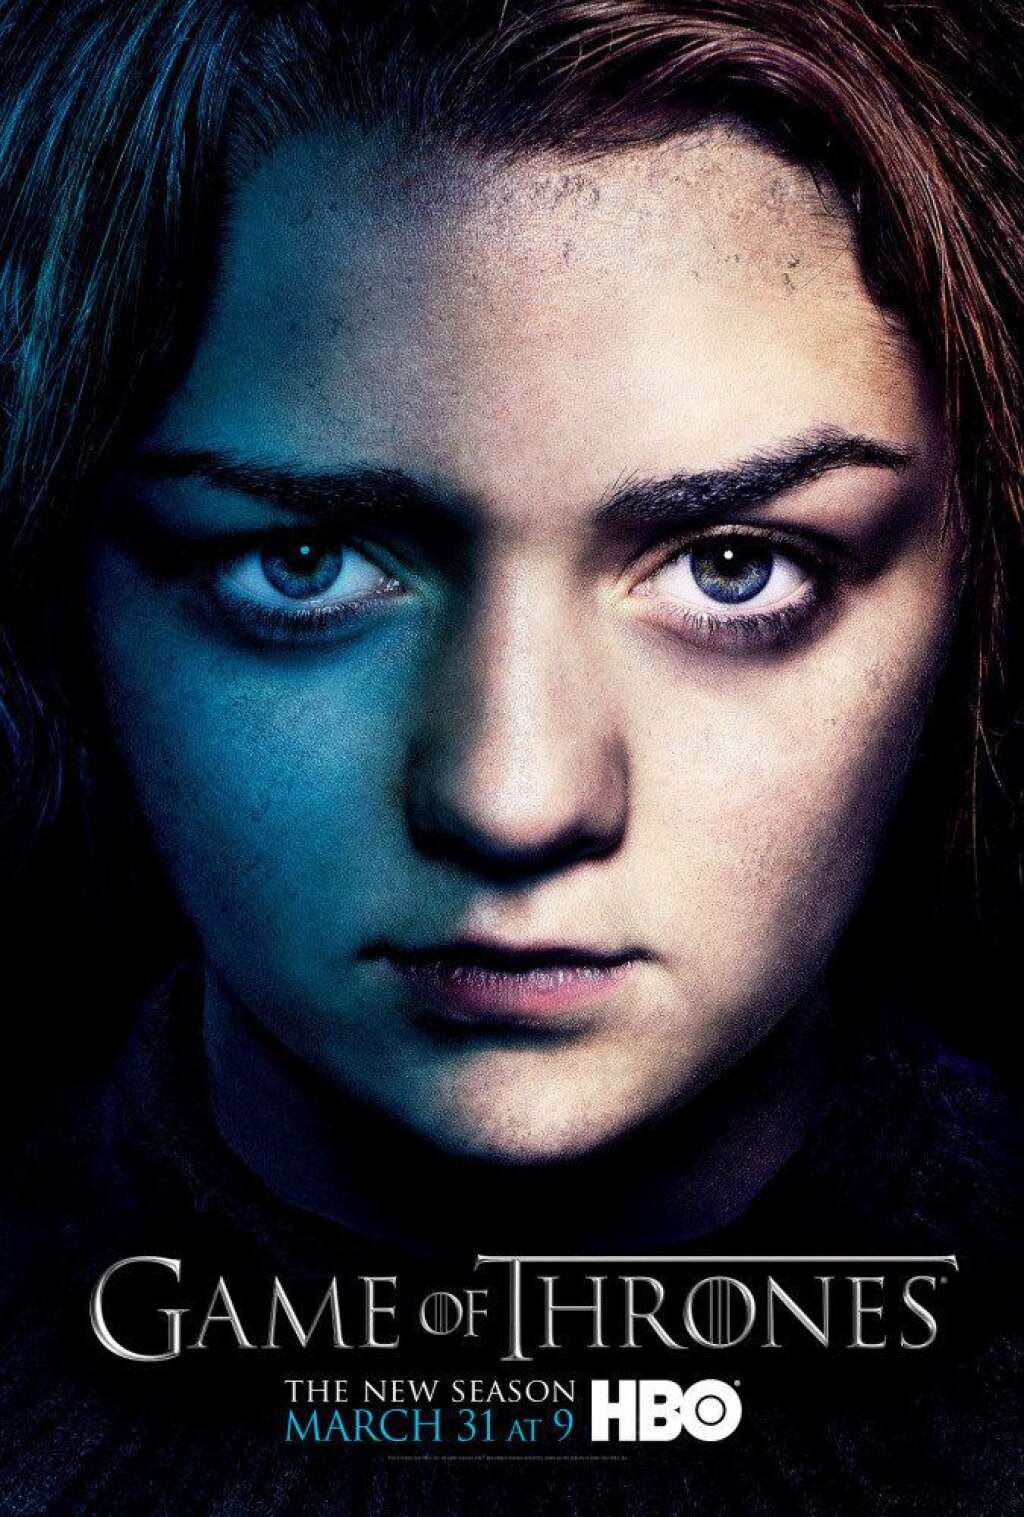 'Game of Thrones' Character Posters - Maisie Williams as Arya Stark.